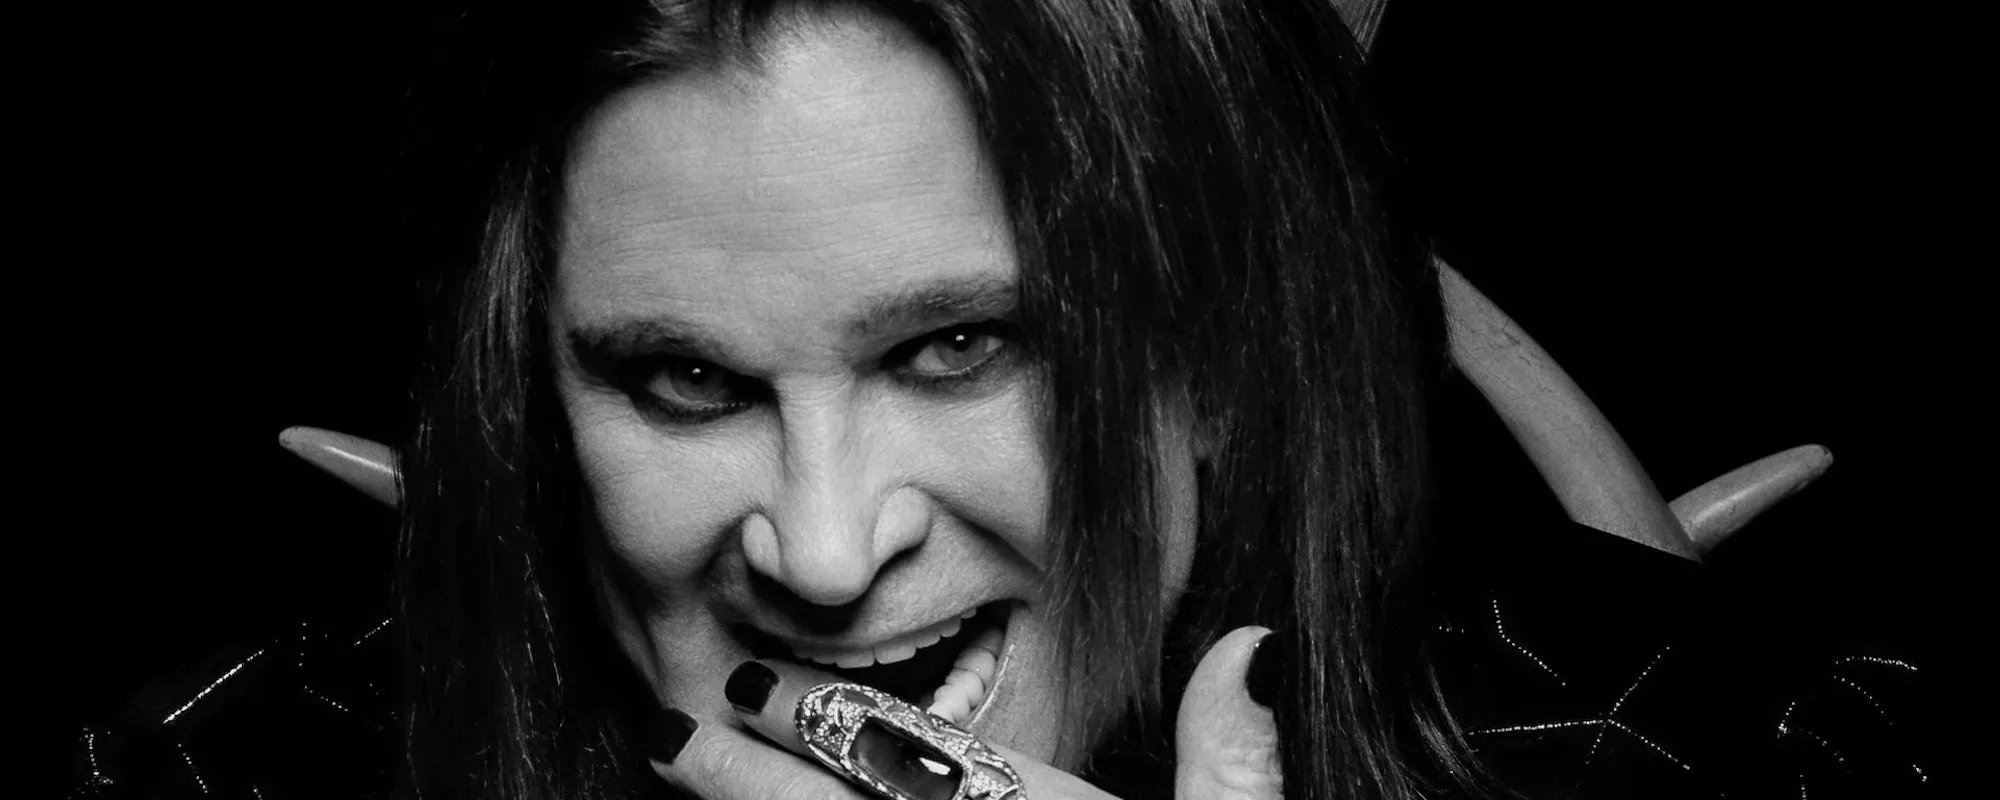 Ozzy Osbourne Says He Wants to “Stay” in America